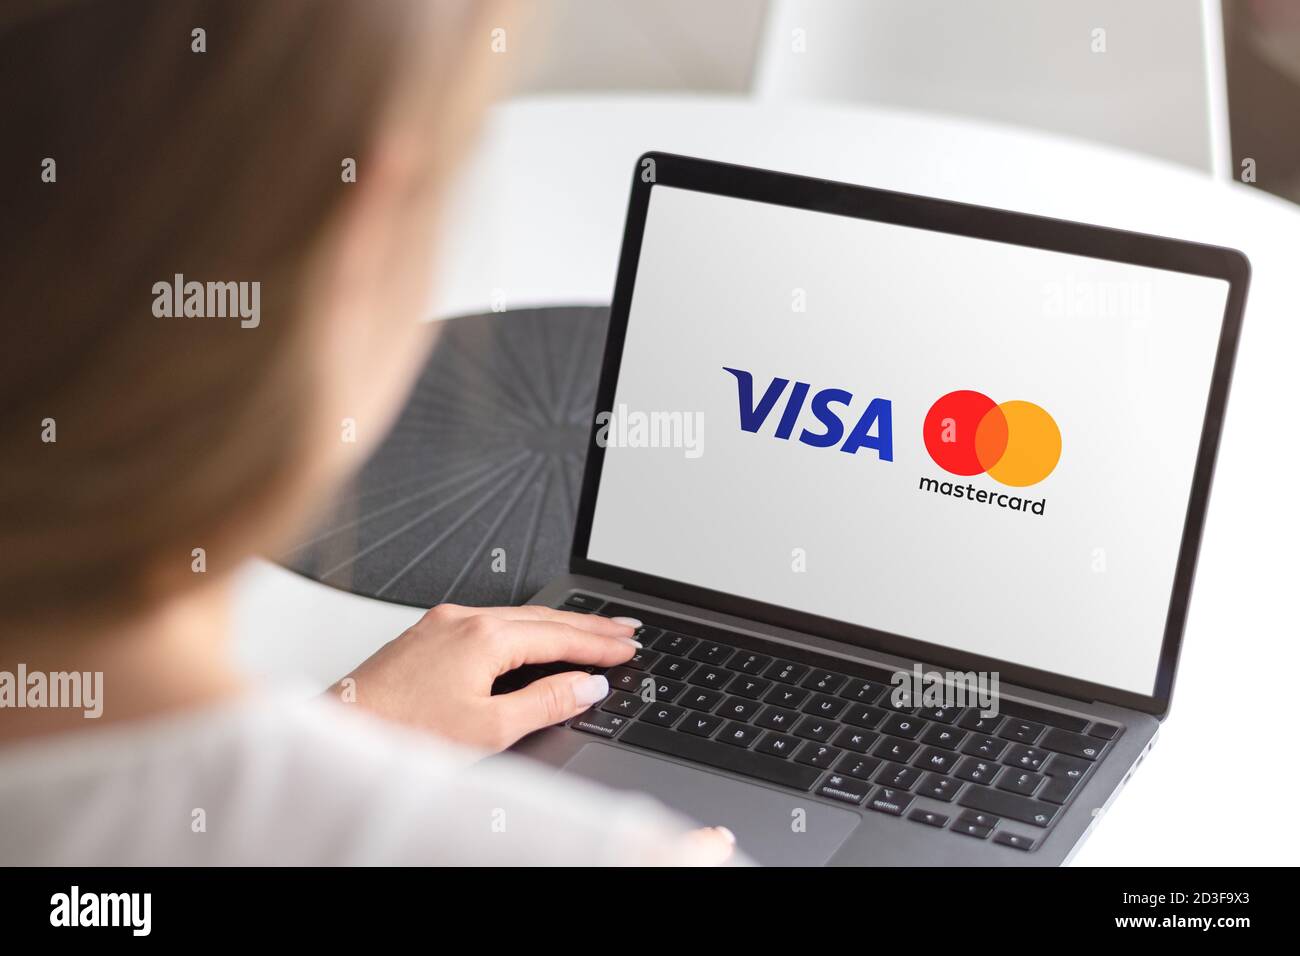 Guilherand-Granges, France - October 08, 2020. Smartphone with Visa and Mastercard logo. Multinational financial services cooperations. Credit cards. Stock Photo